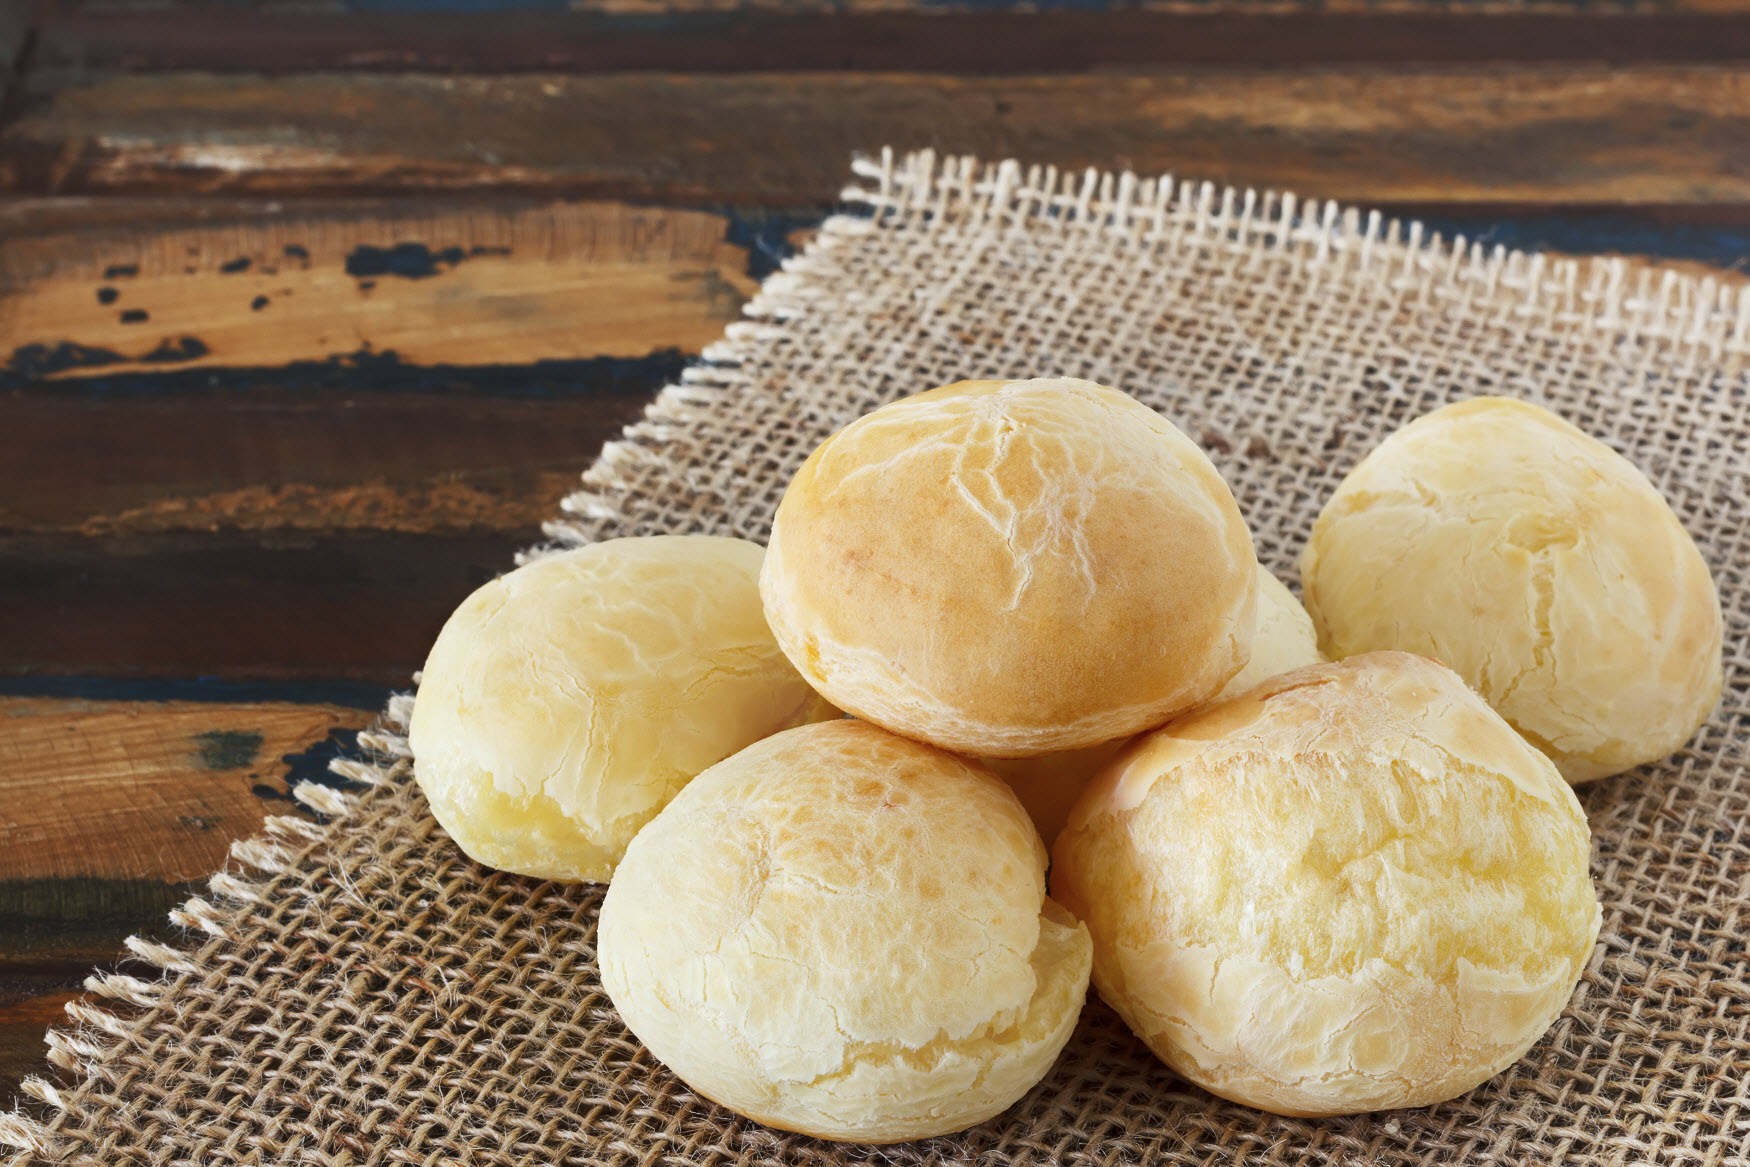 This image: Pao de queijo or cheese bread is a typical Brazilian snack.